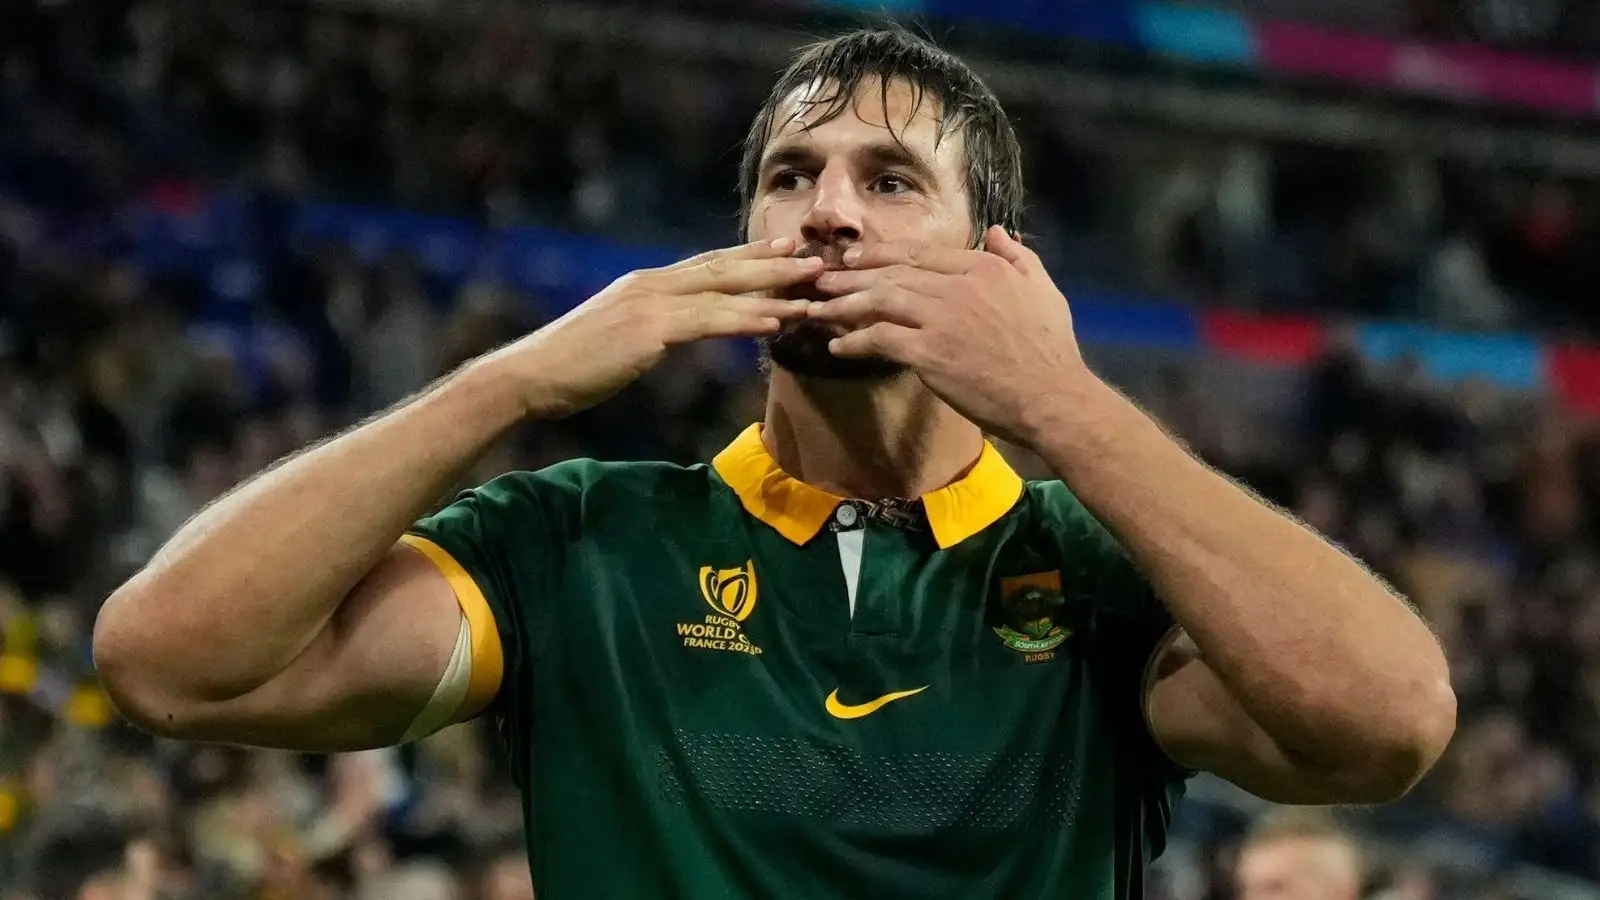 Springboks lock Eben Etzebeth blows a kiss to the crowd after the end of the Rugby World Cup quarterfinal match between France and South Africa at the Stade de France